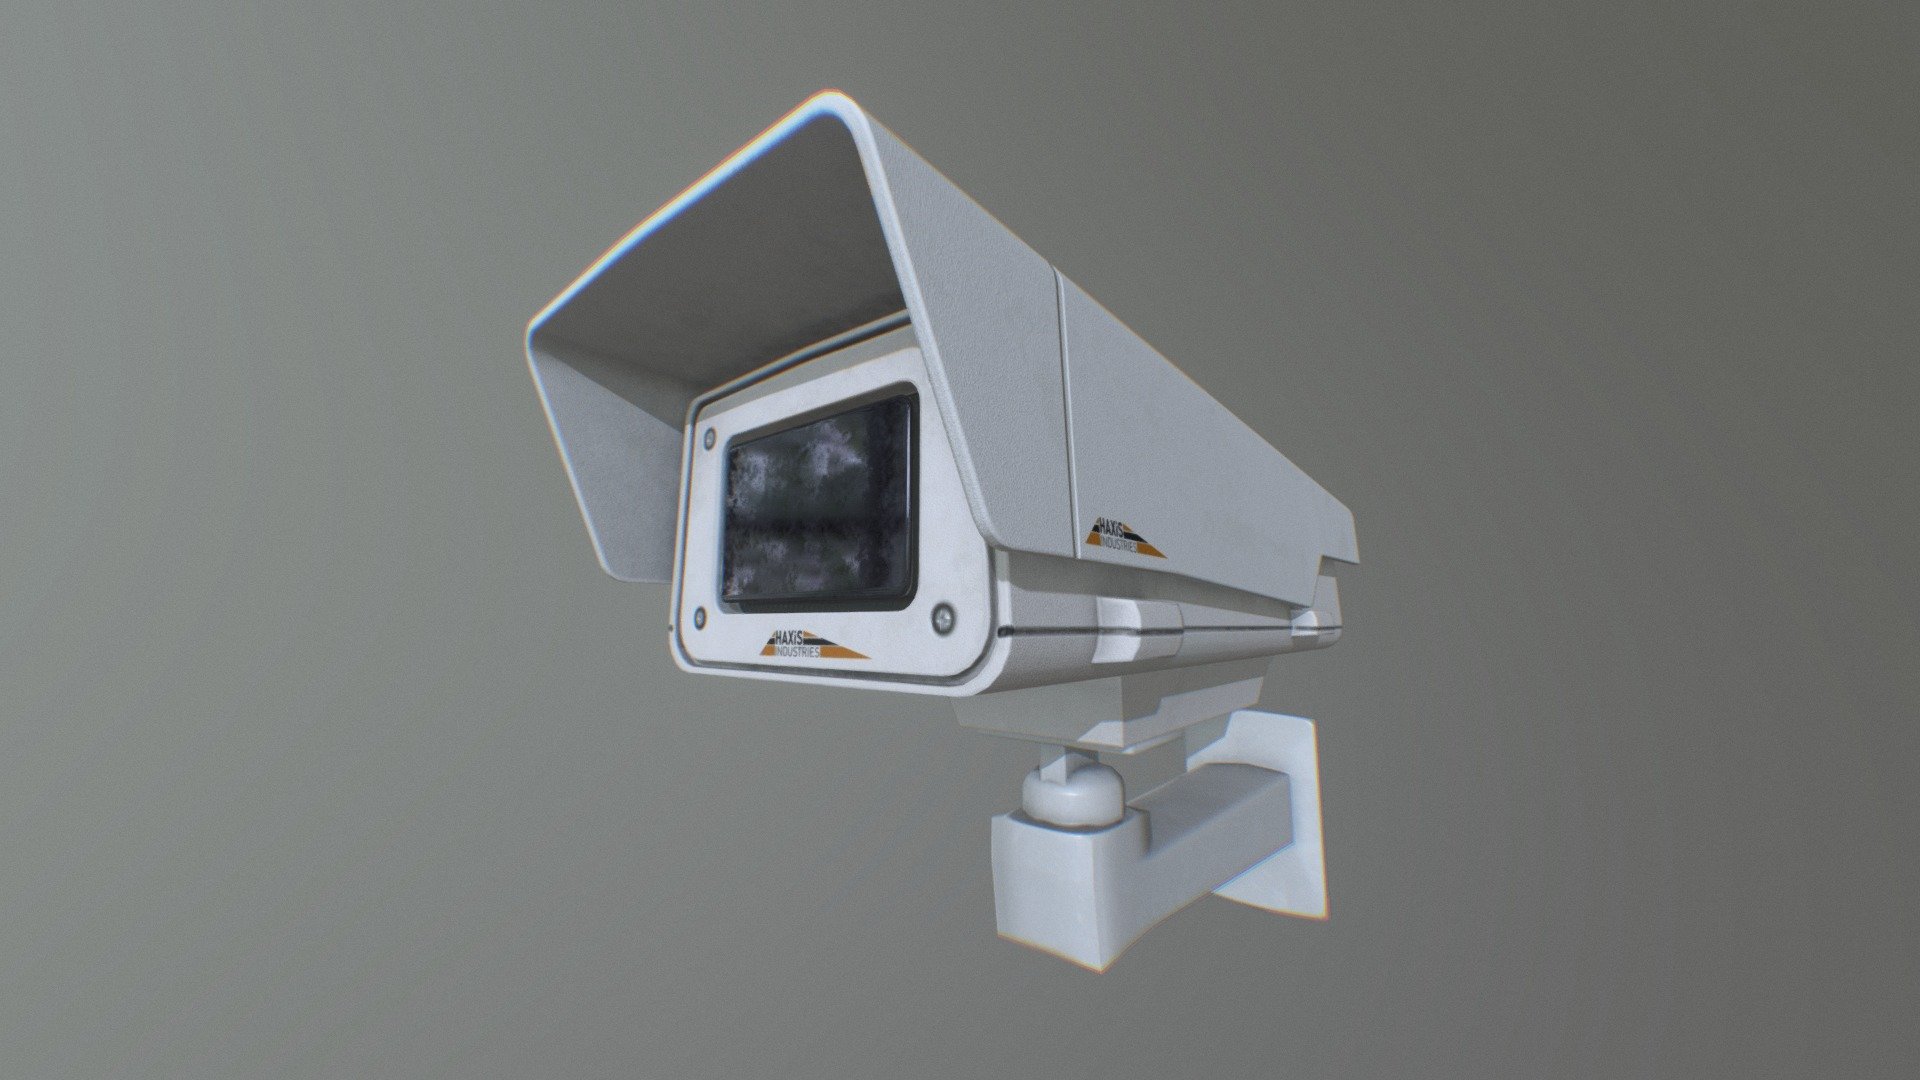 Here is a security camera made produced by the fictional Haxis Industries.

Modeled in Blender Textured in Substance Painter.

Number of Textures Sets: 1

Included 4k Textures:

Base Color
Roughness
Height
Metallic
Normal

Geometry:

Tris: 2412
Verts: 1216

Let me know if you have any questions or issues! - Security Camera - Haxis - Buy Royalty Free 3D model by Draaphy (@dridder) 3d model